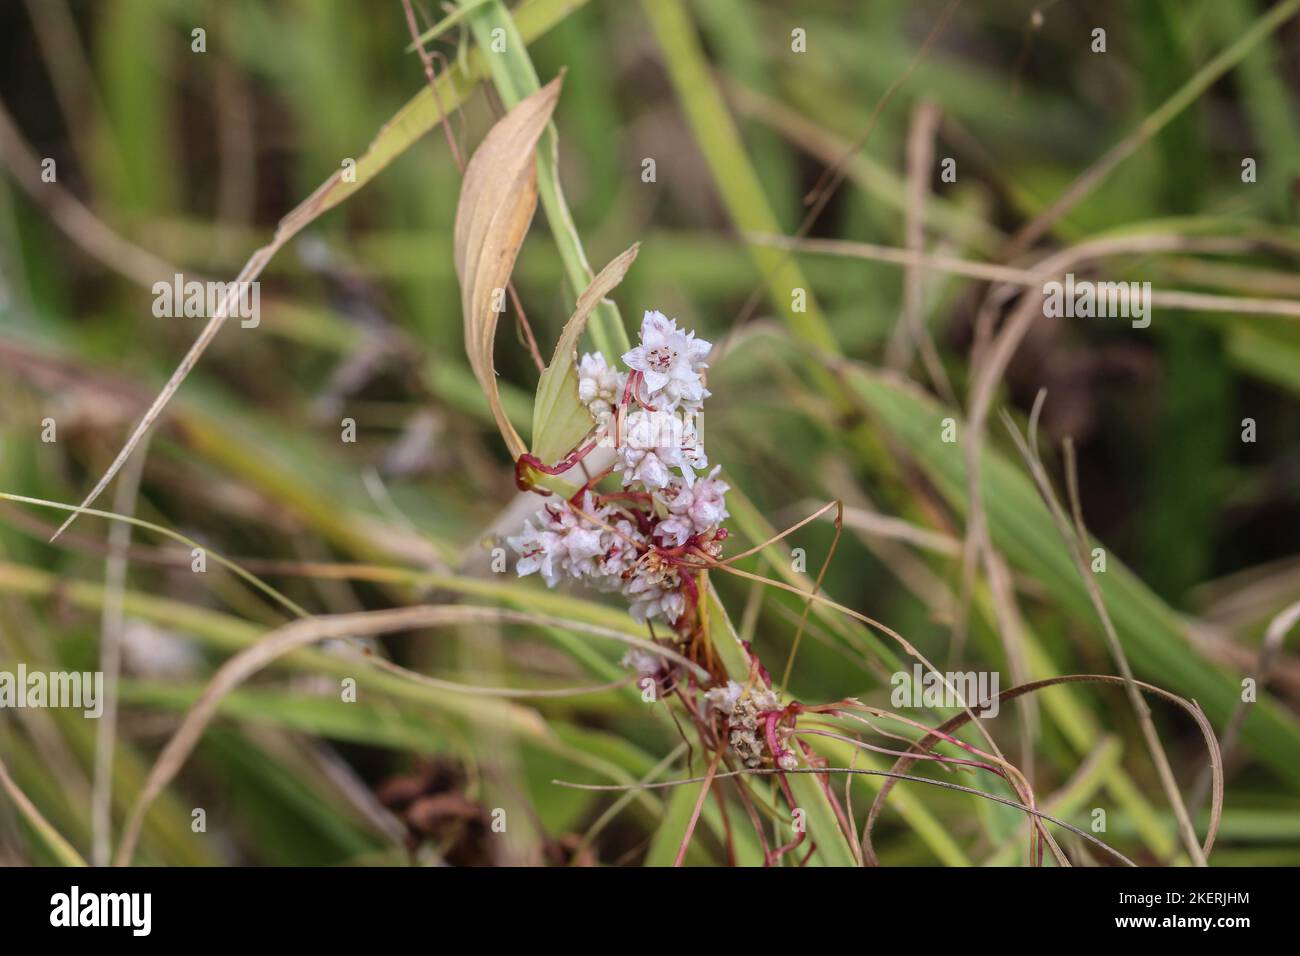 Pale flowers of a parasiti plant amarbel (latin name of genus: Cuscuta) in a meadow in Montenegro Stock Photo